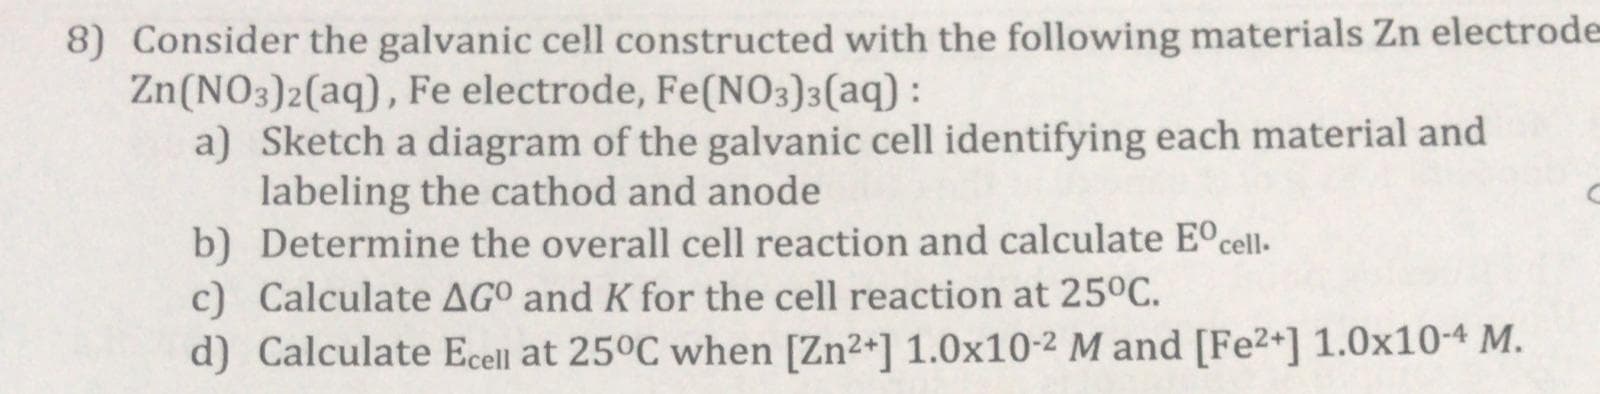 8) Consider the galvanic cell constructed with the following materials Zn electro
Zn(NO3)2(aq), Fe electrode, Fe(NO3)3(aq) :
a) Sketch a diagram of the galvanic cell identifying each material and
labeling the cathod and anode
b) Determine the overall cell reaction and calculate E°cell-
c) Calculate AGO and K for the cell reaction at 25°C.
d) Calculate Ecell at 25°C when [Zn2+] 1.0x10-2 M and [Fe2+] 1.0x10-4 M.
